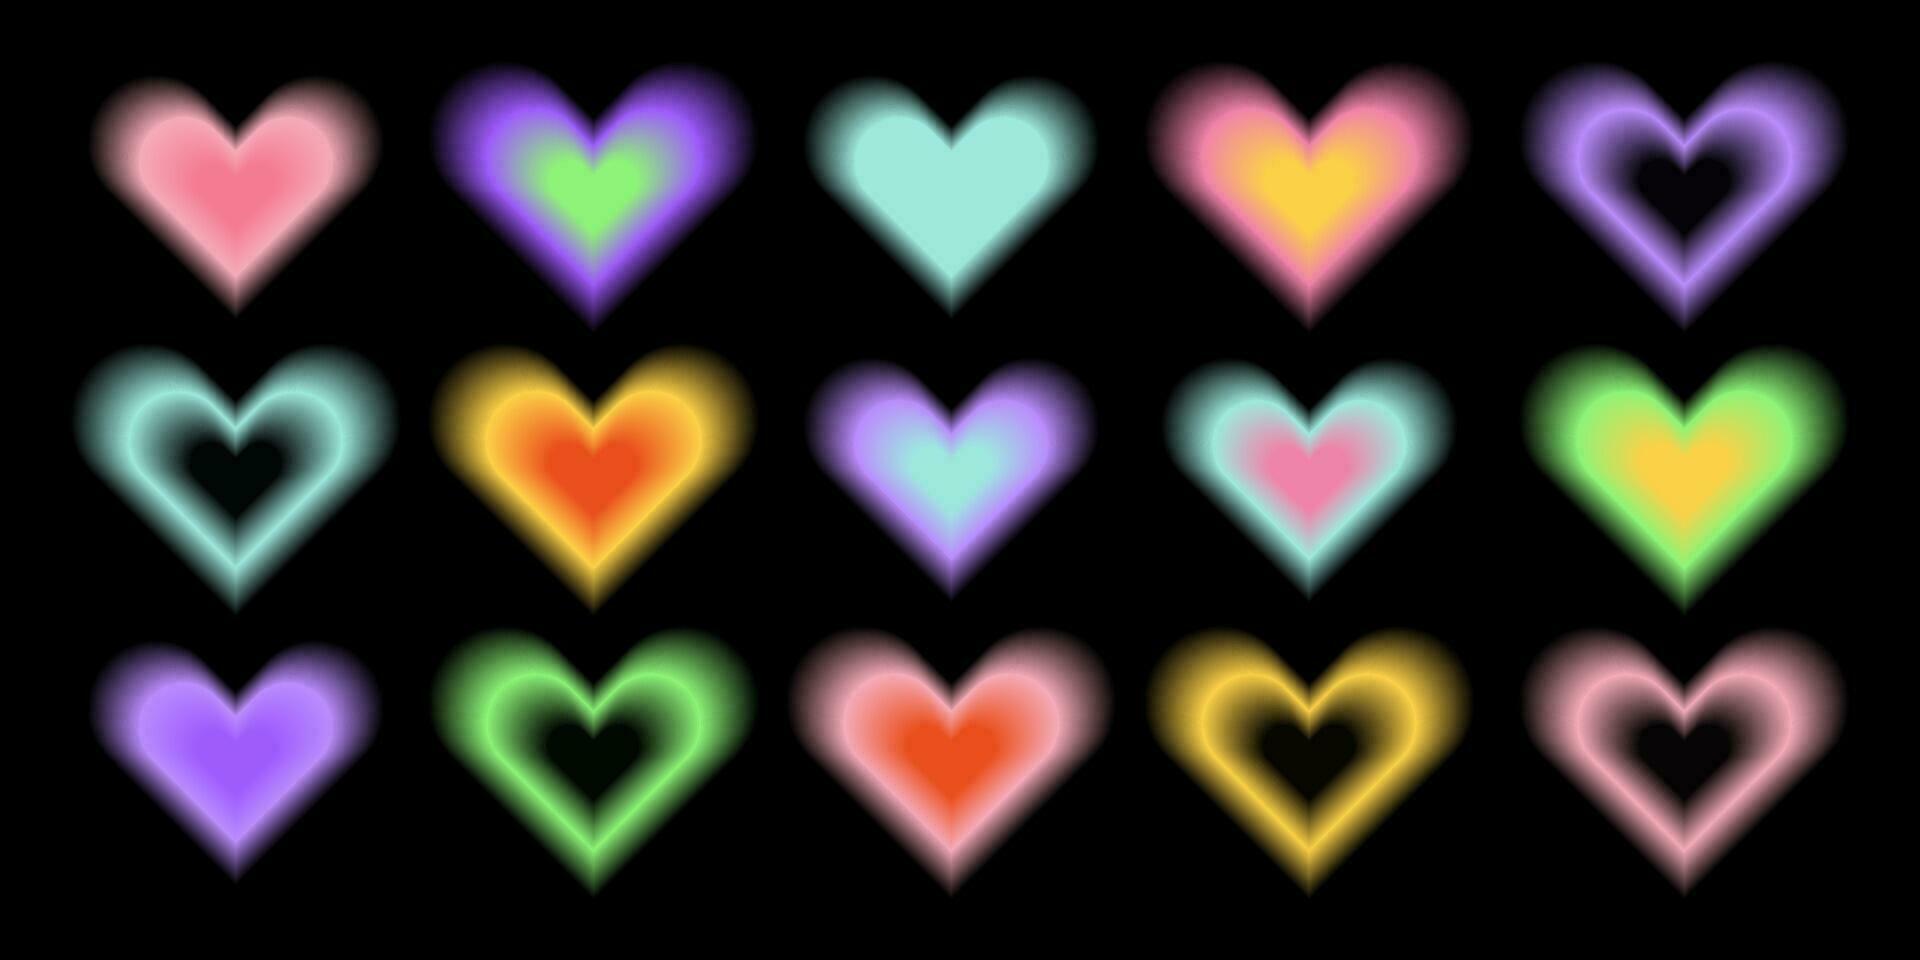 Y2k aesthetic blurred gradient aura hearts. Trendy set of modern blurry figures in brutalism style on black background. Romantic transparent heart elements for social media, posters, ads vector